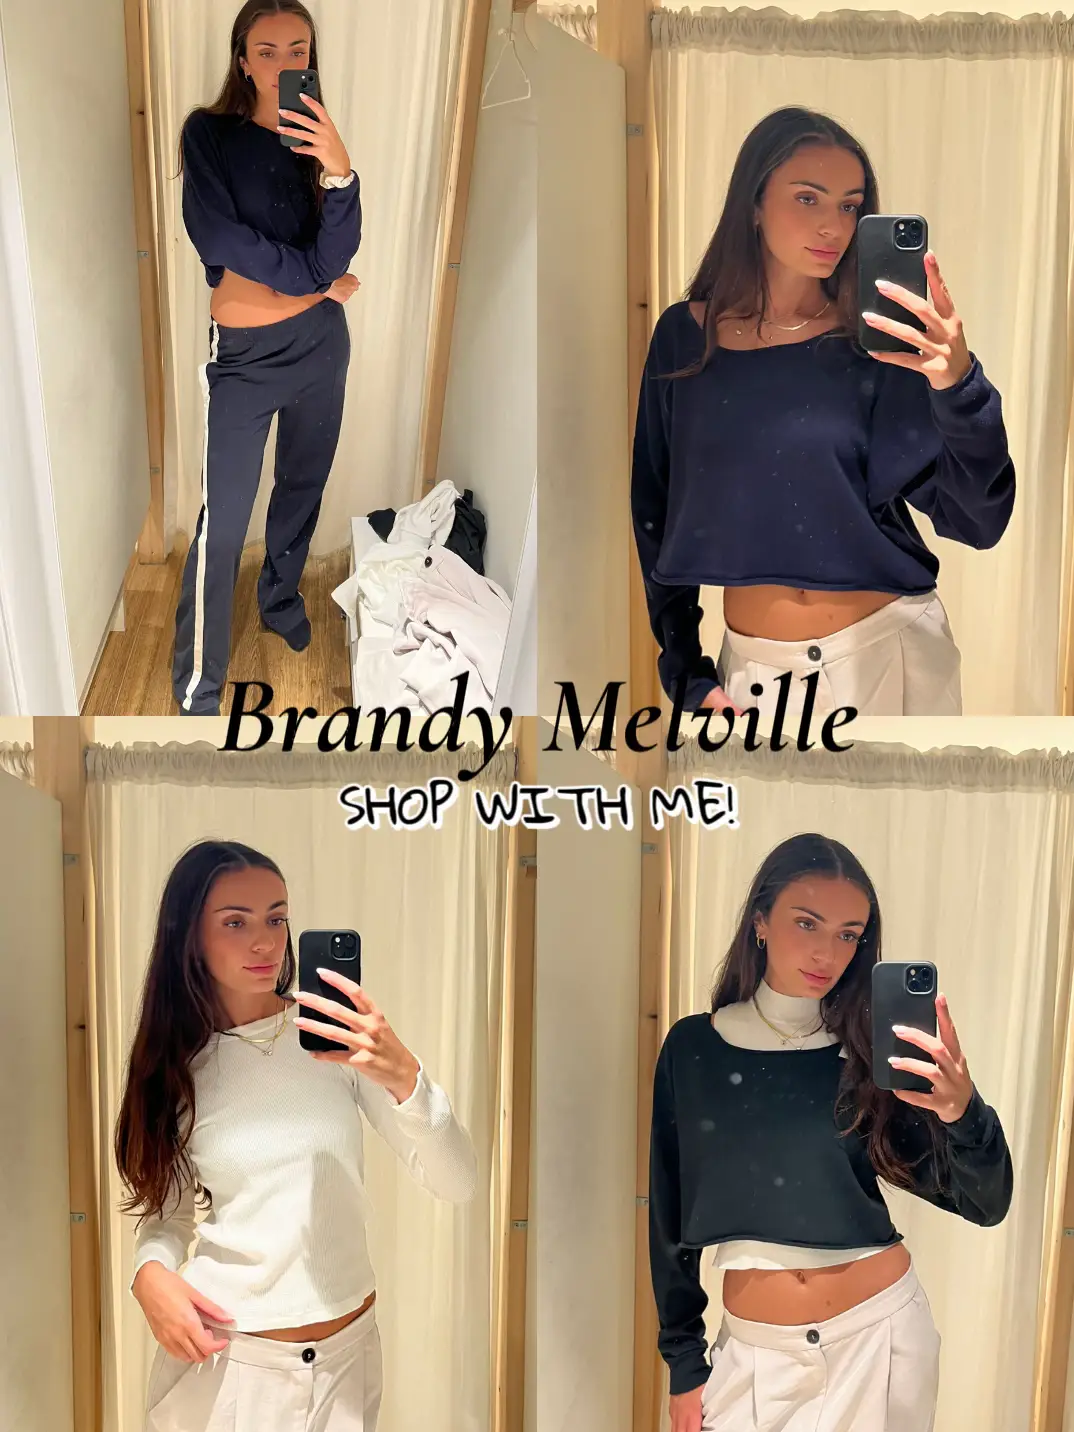 43. SHOP WITH ME at Brandy Melville